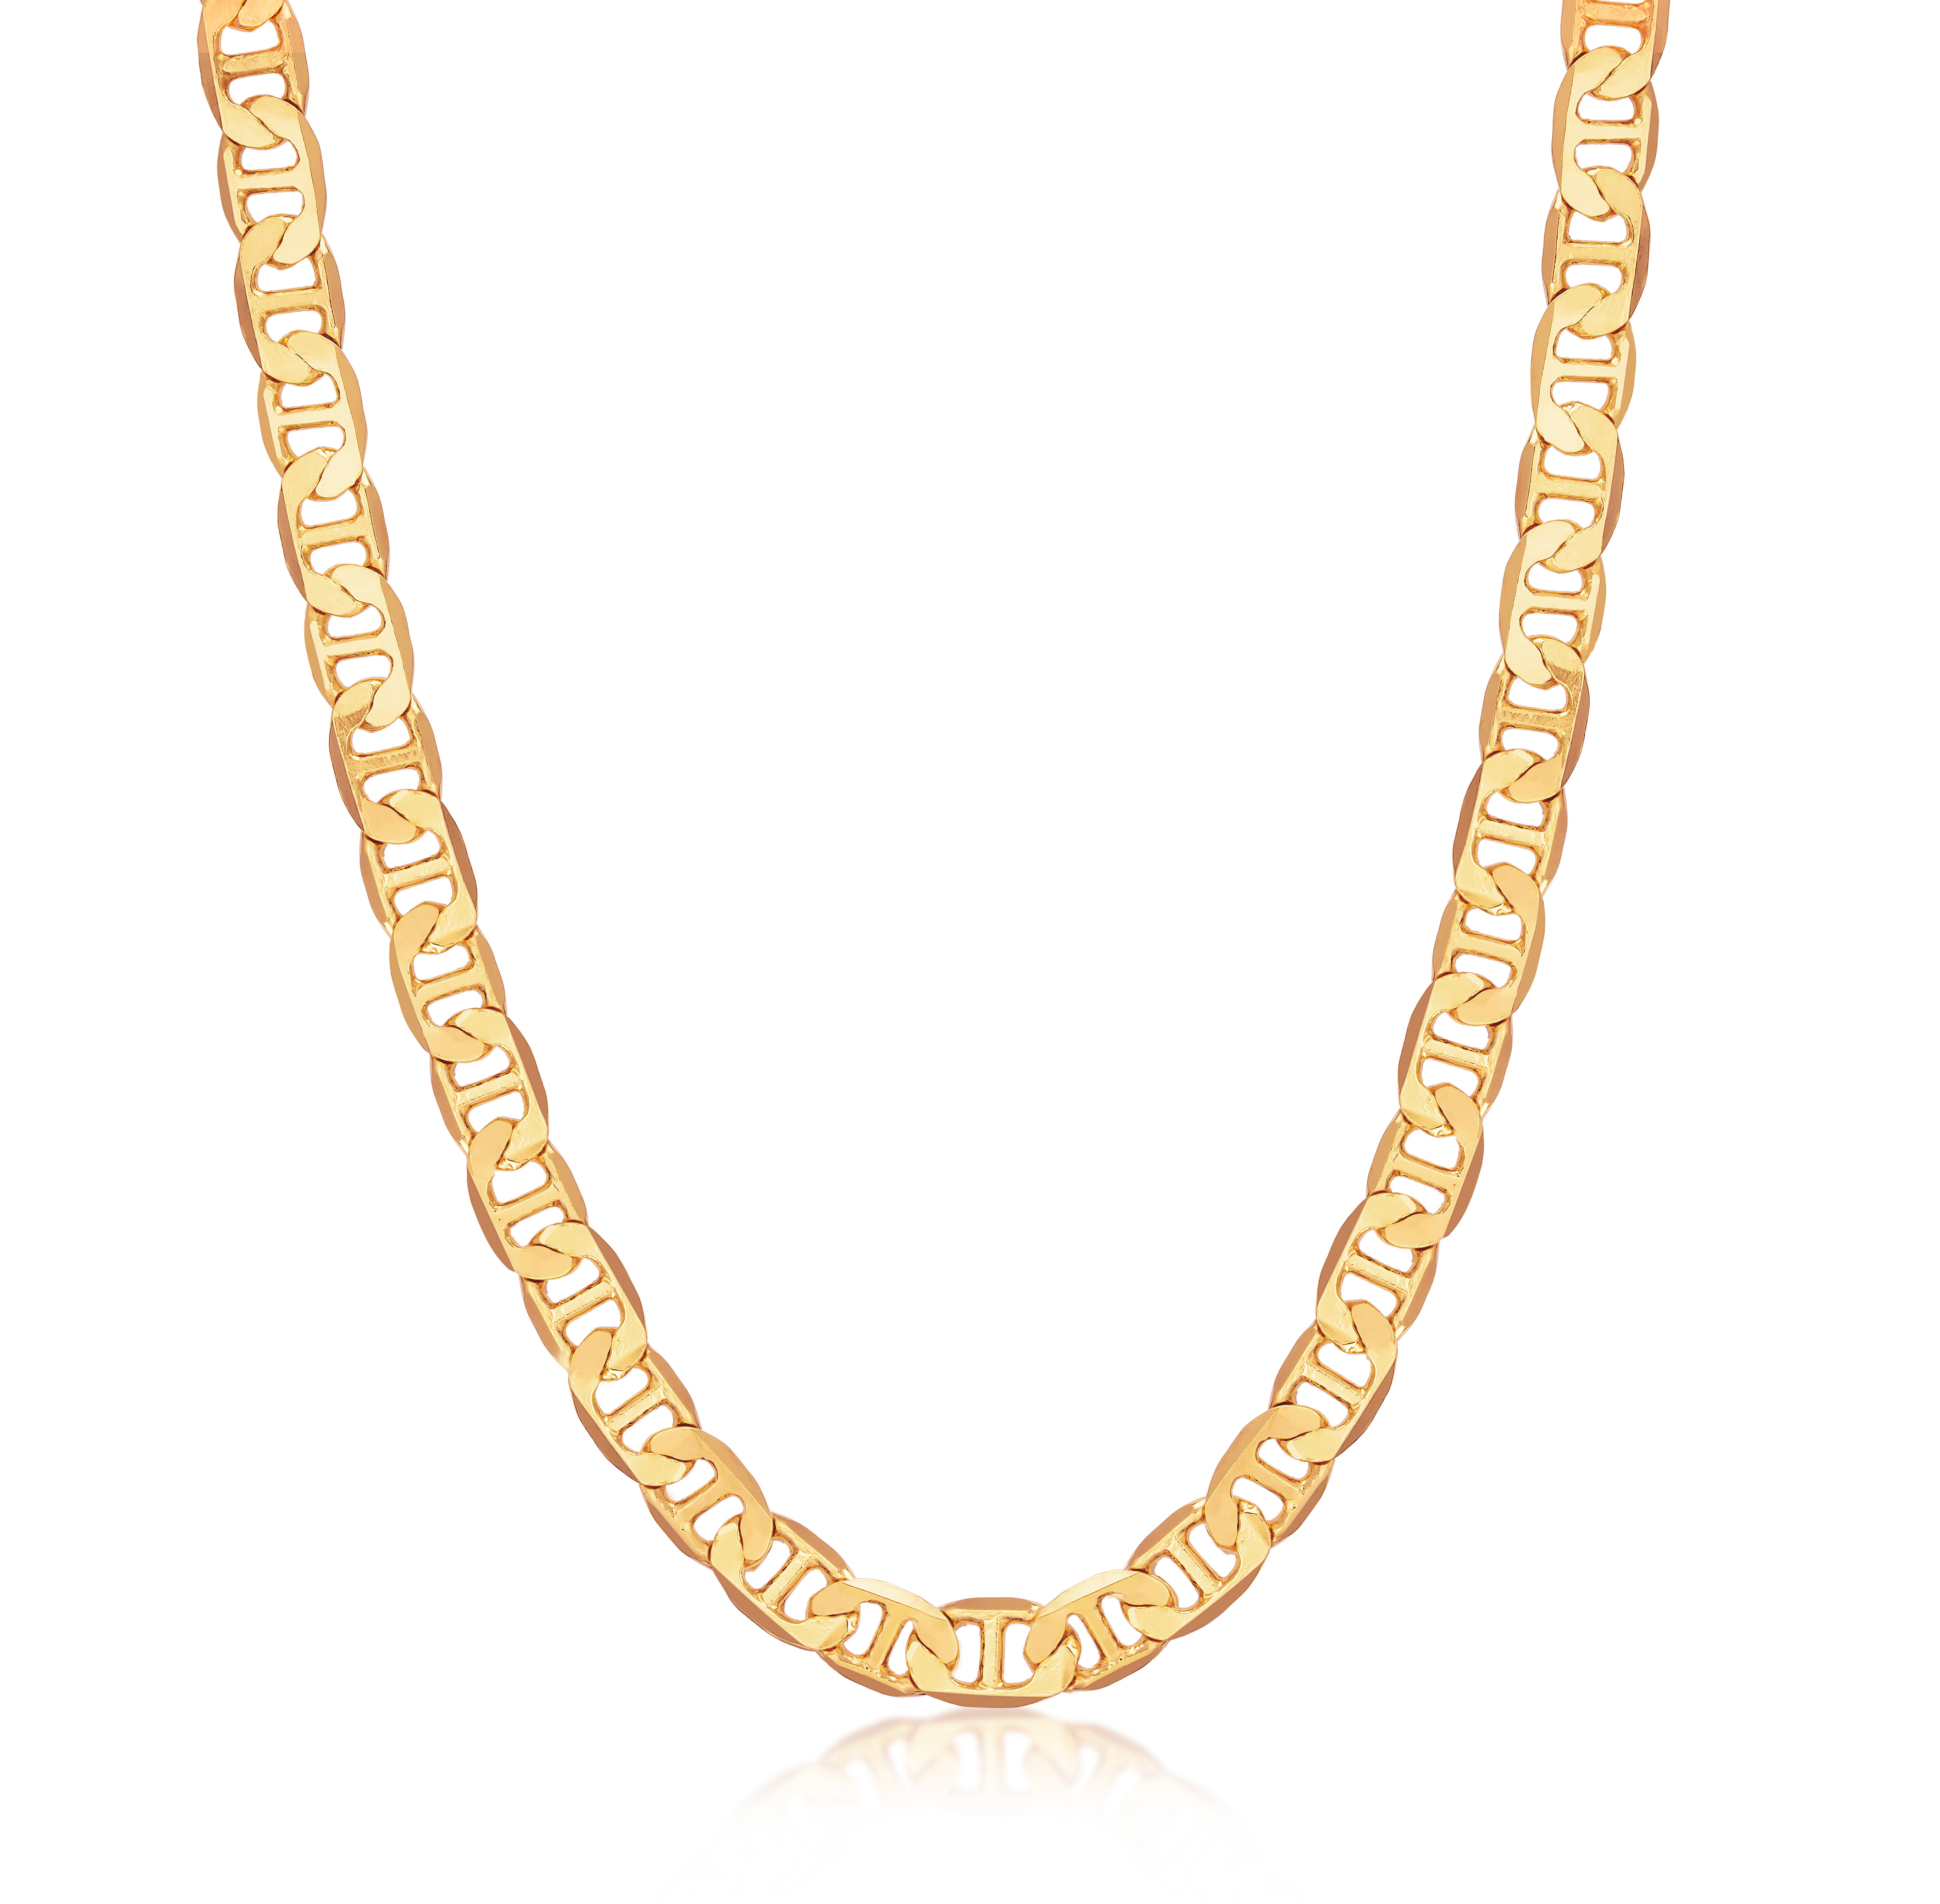 Peermont 18k Gold Plated Flat Mariner 8MM Chain Necklace- 24